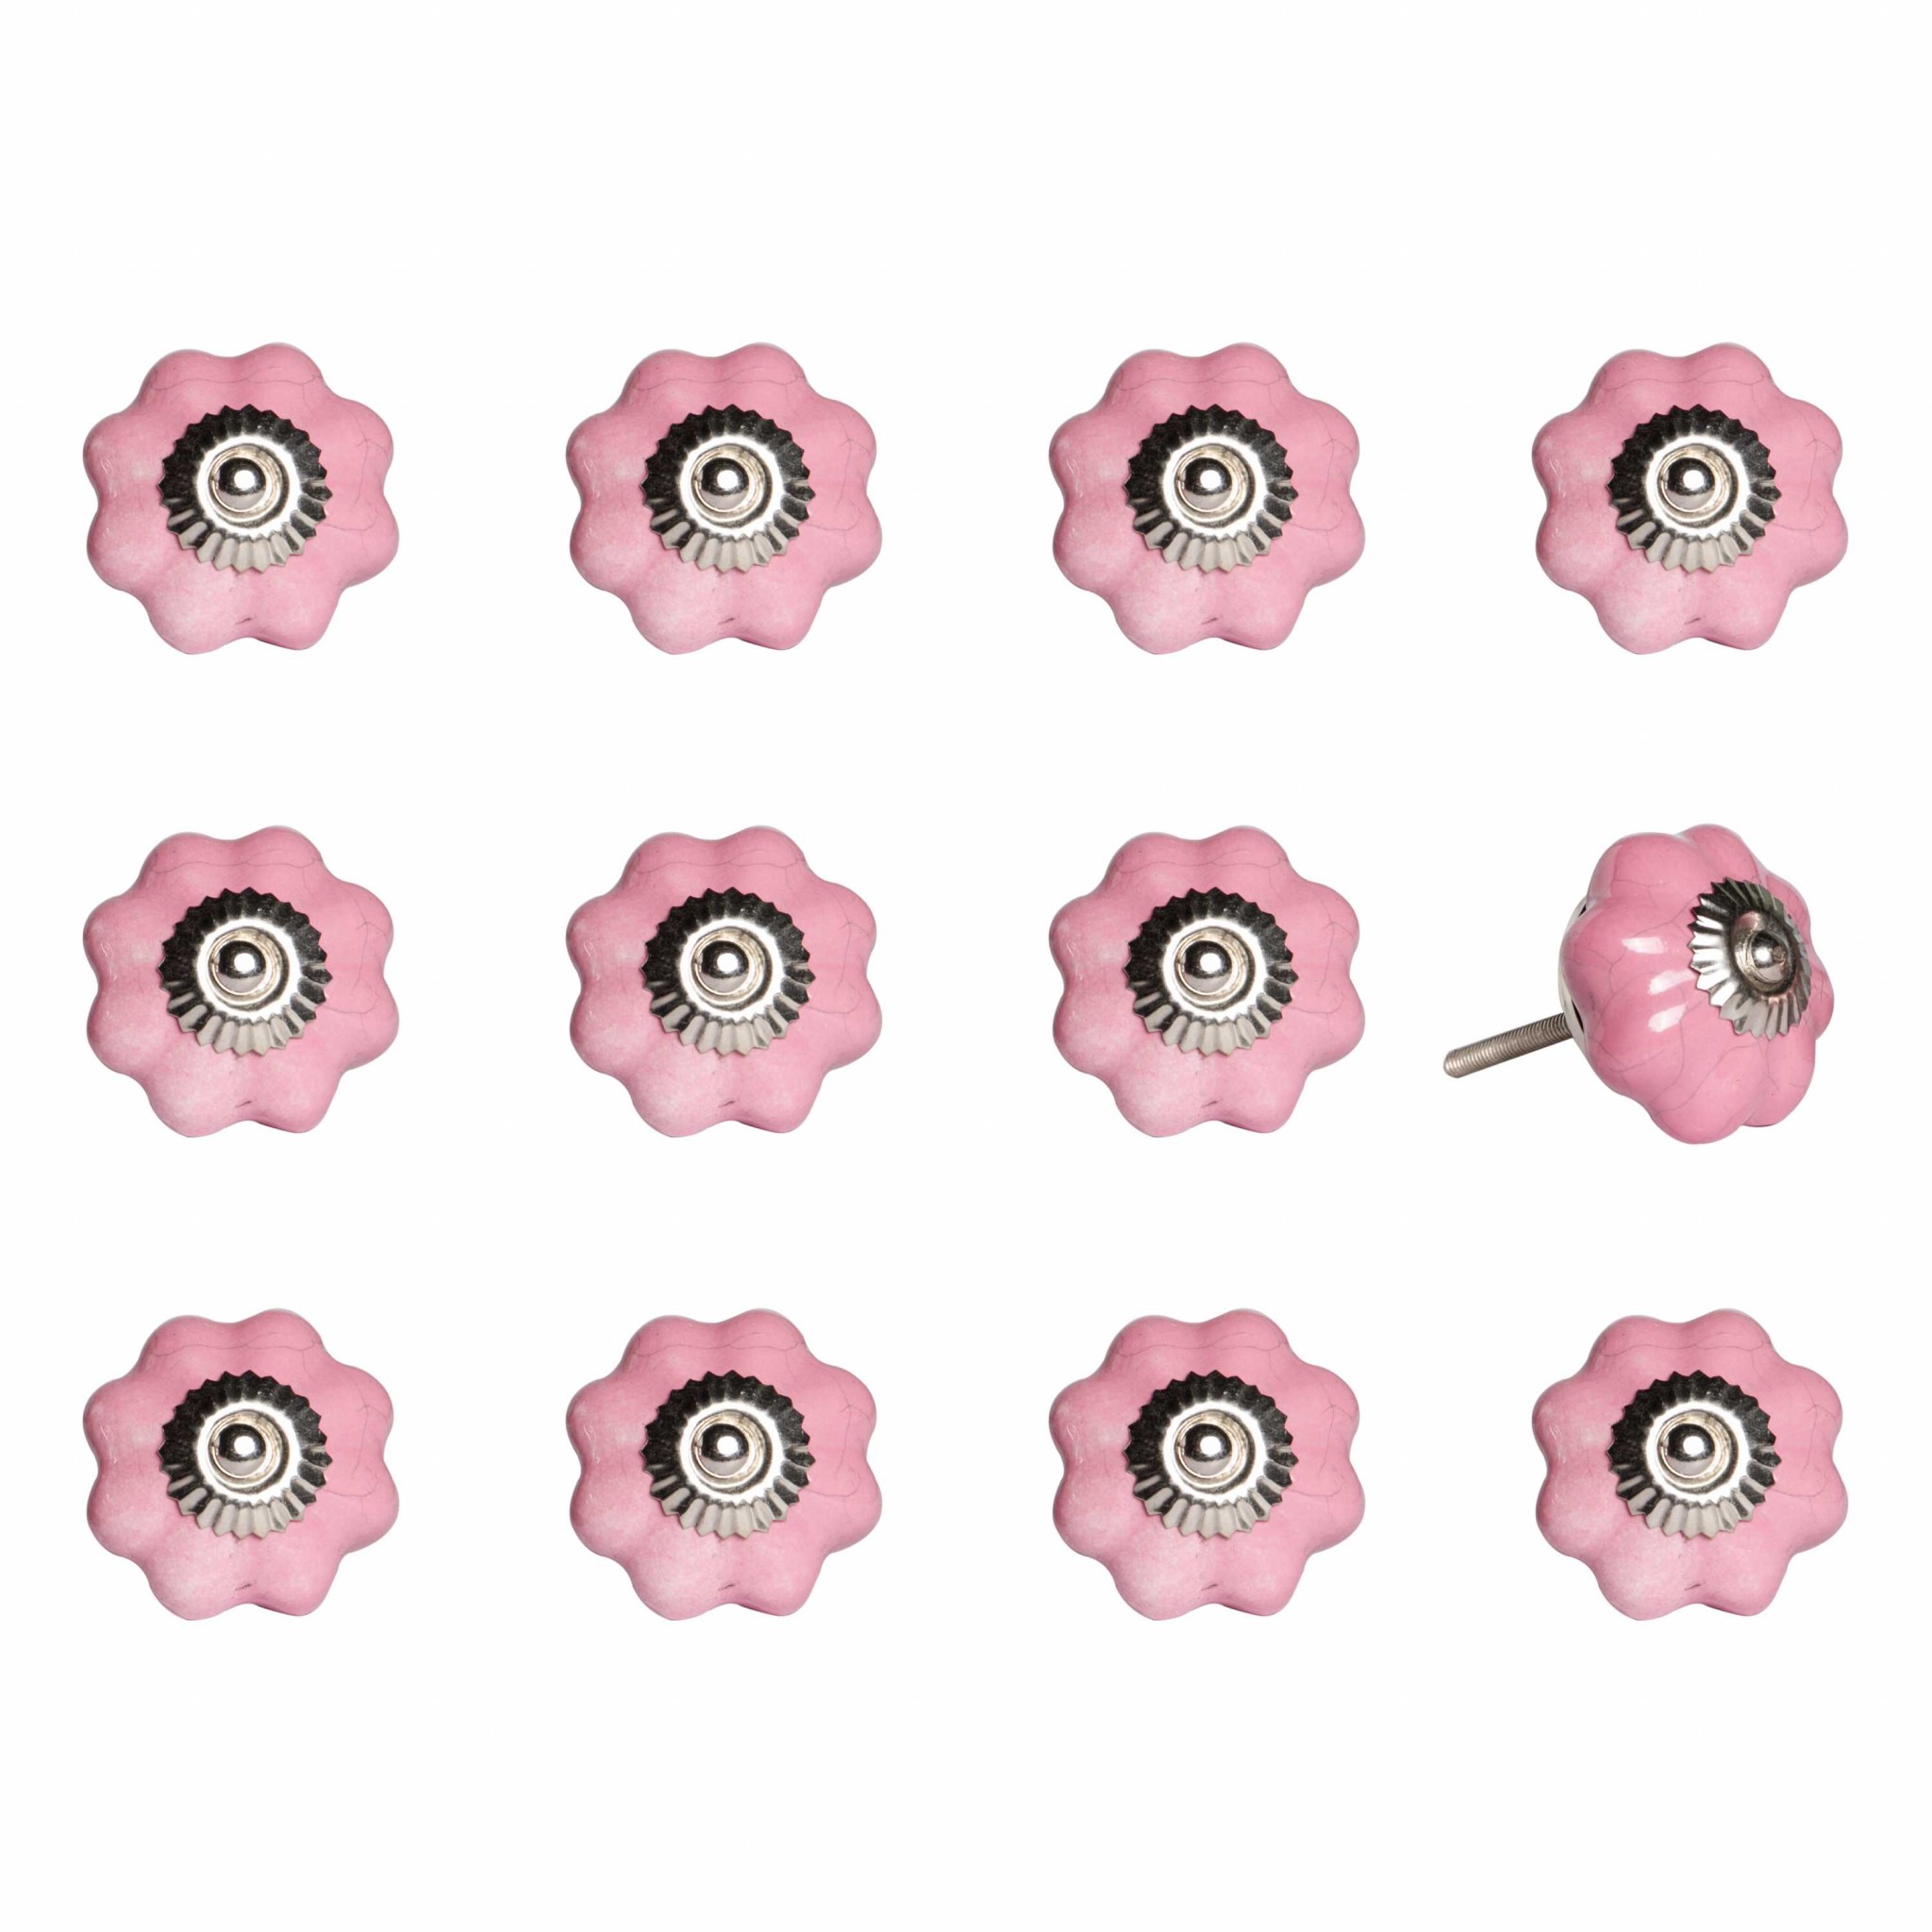 1.5" x 1.5" x 1.5" Pink, Silver asnd Red- Knobs 12-Pack